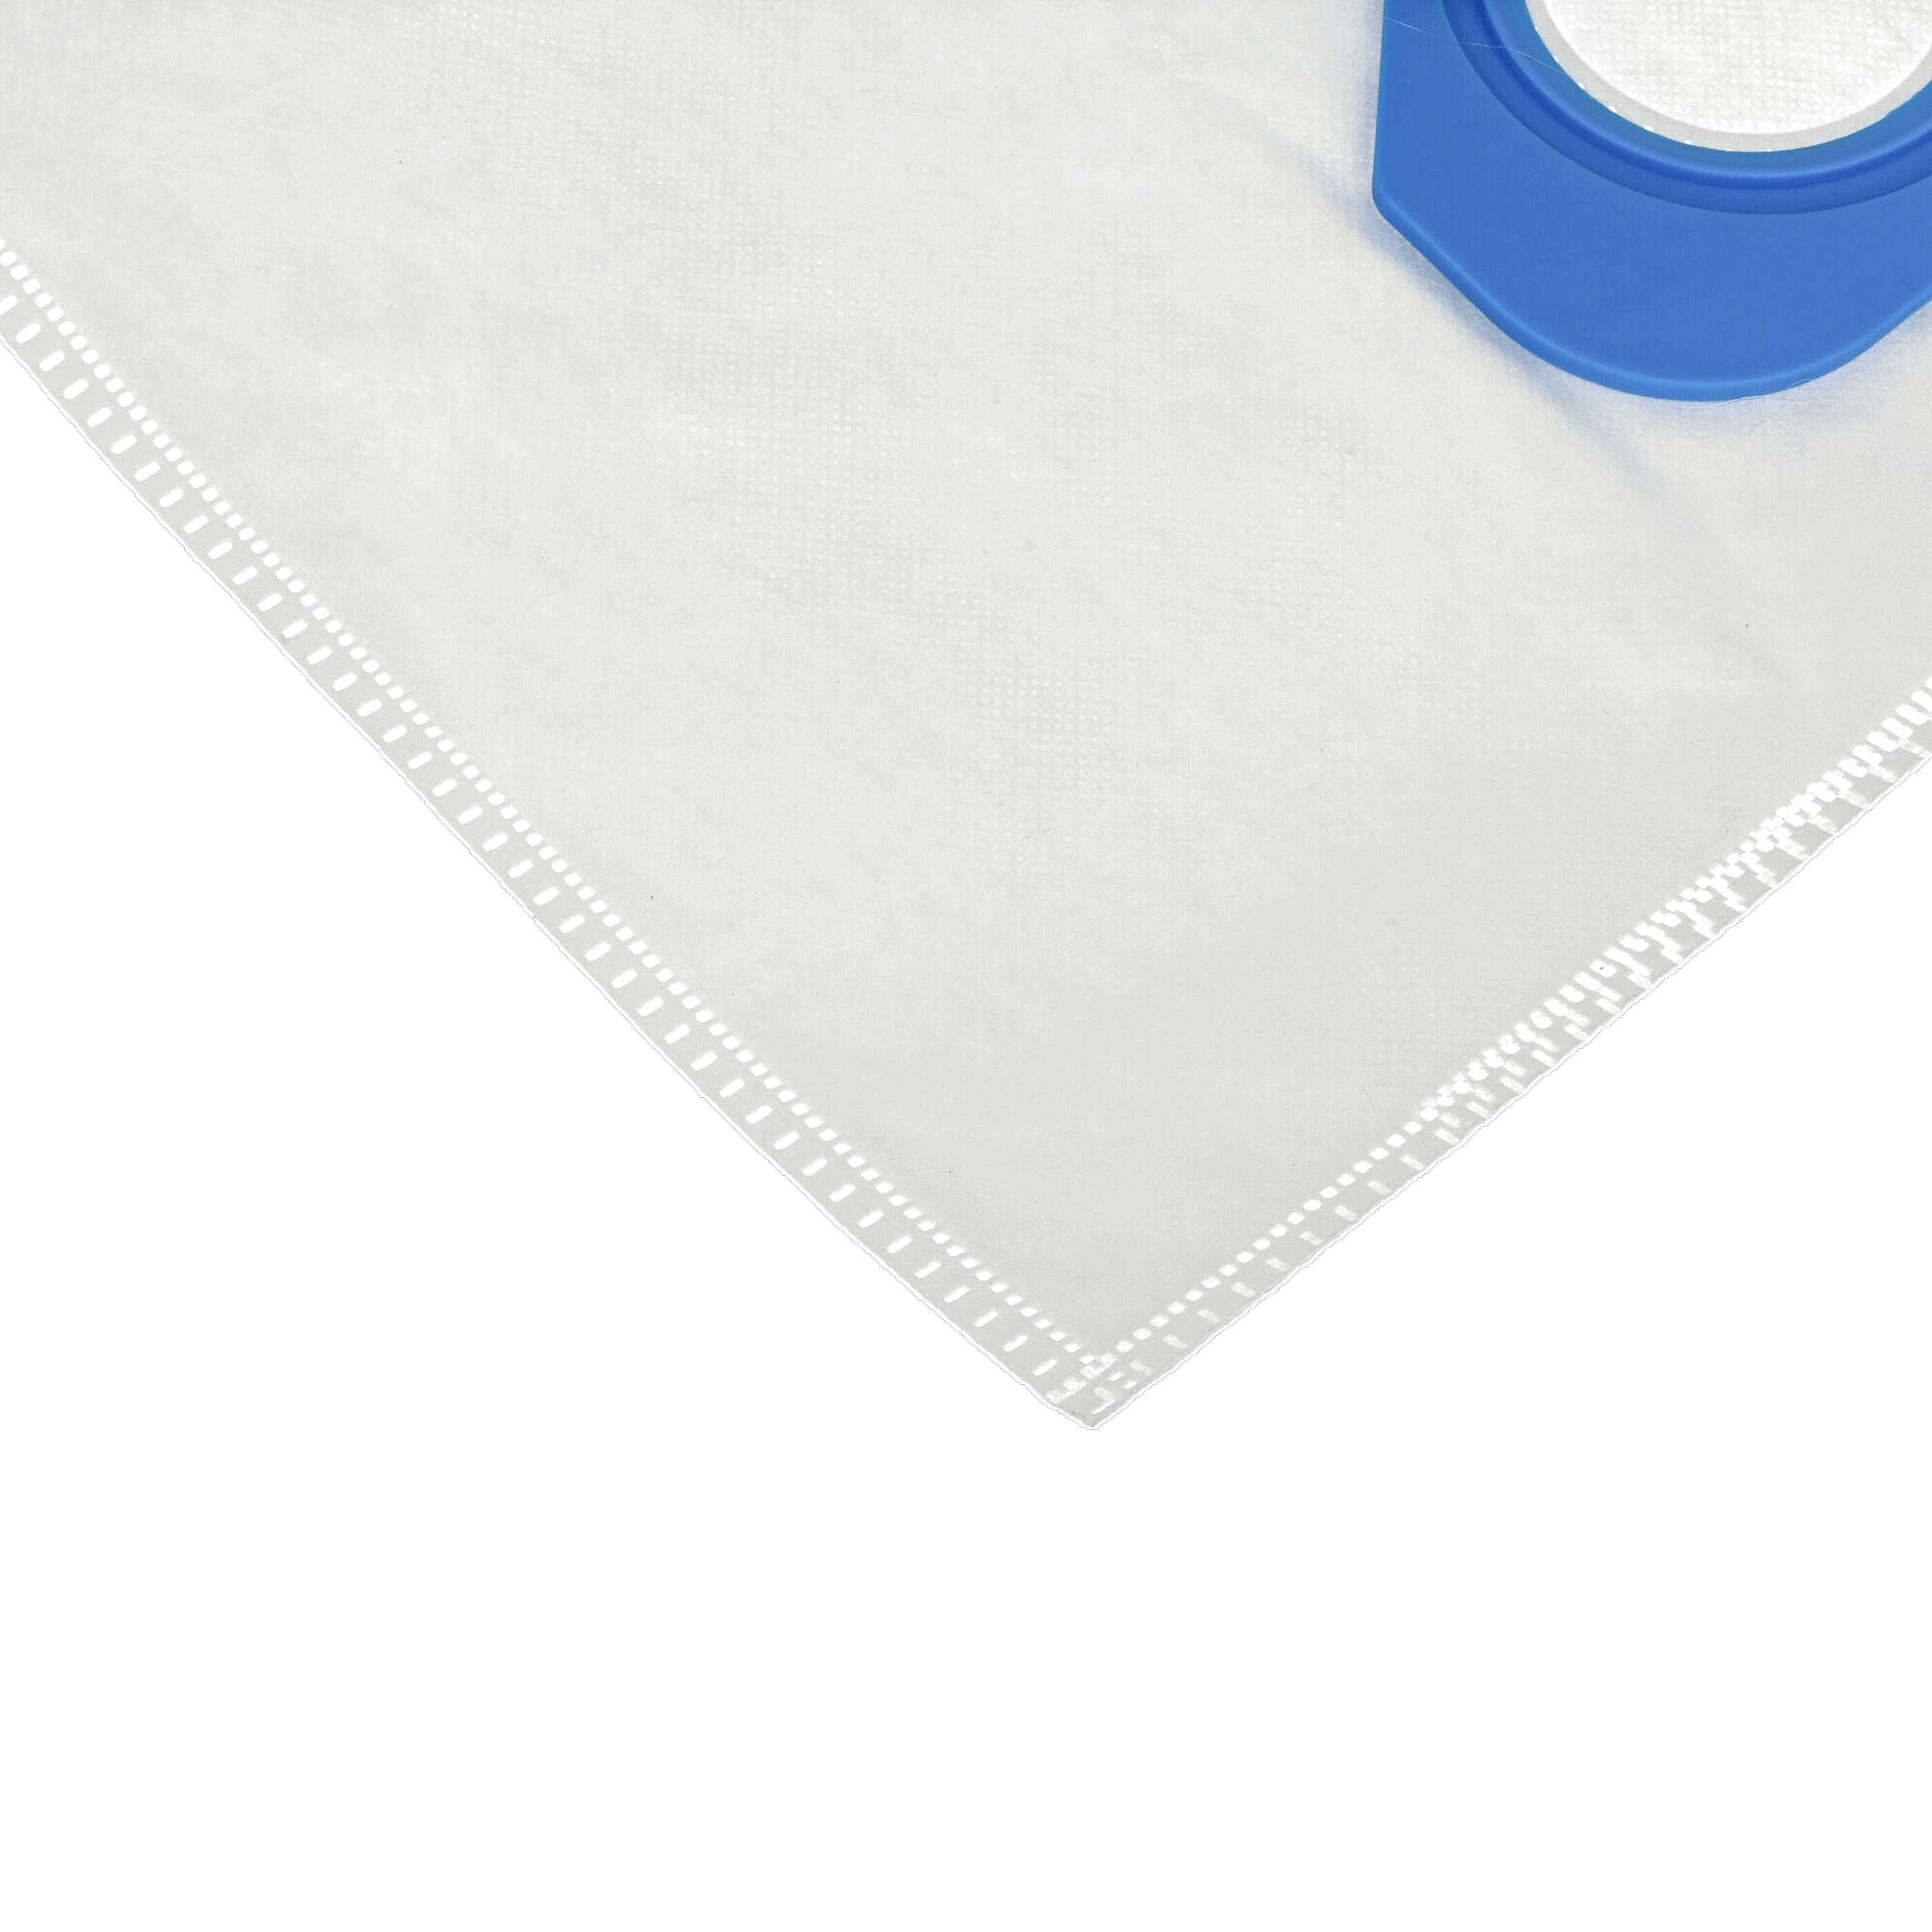 20x Vacuum Cleaner Bag replaces BVC 13060 for BVC - microfleece